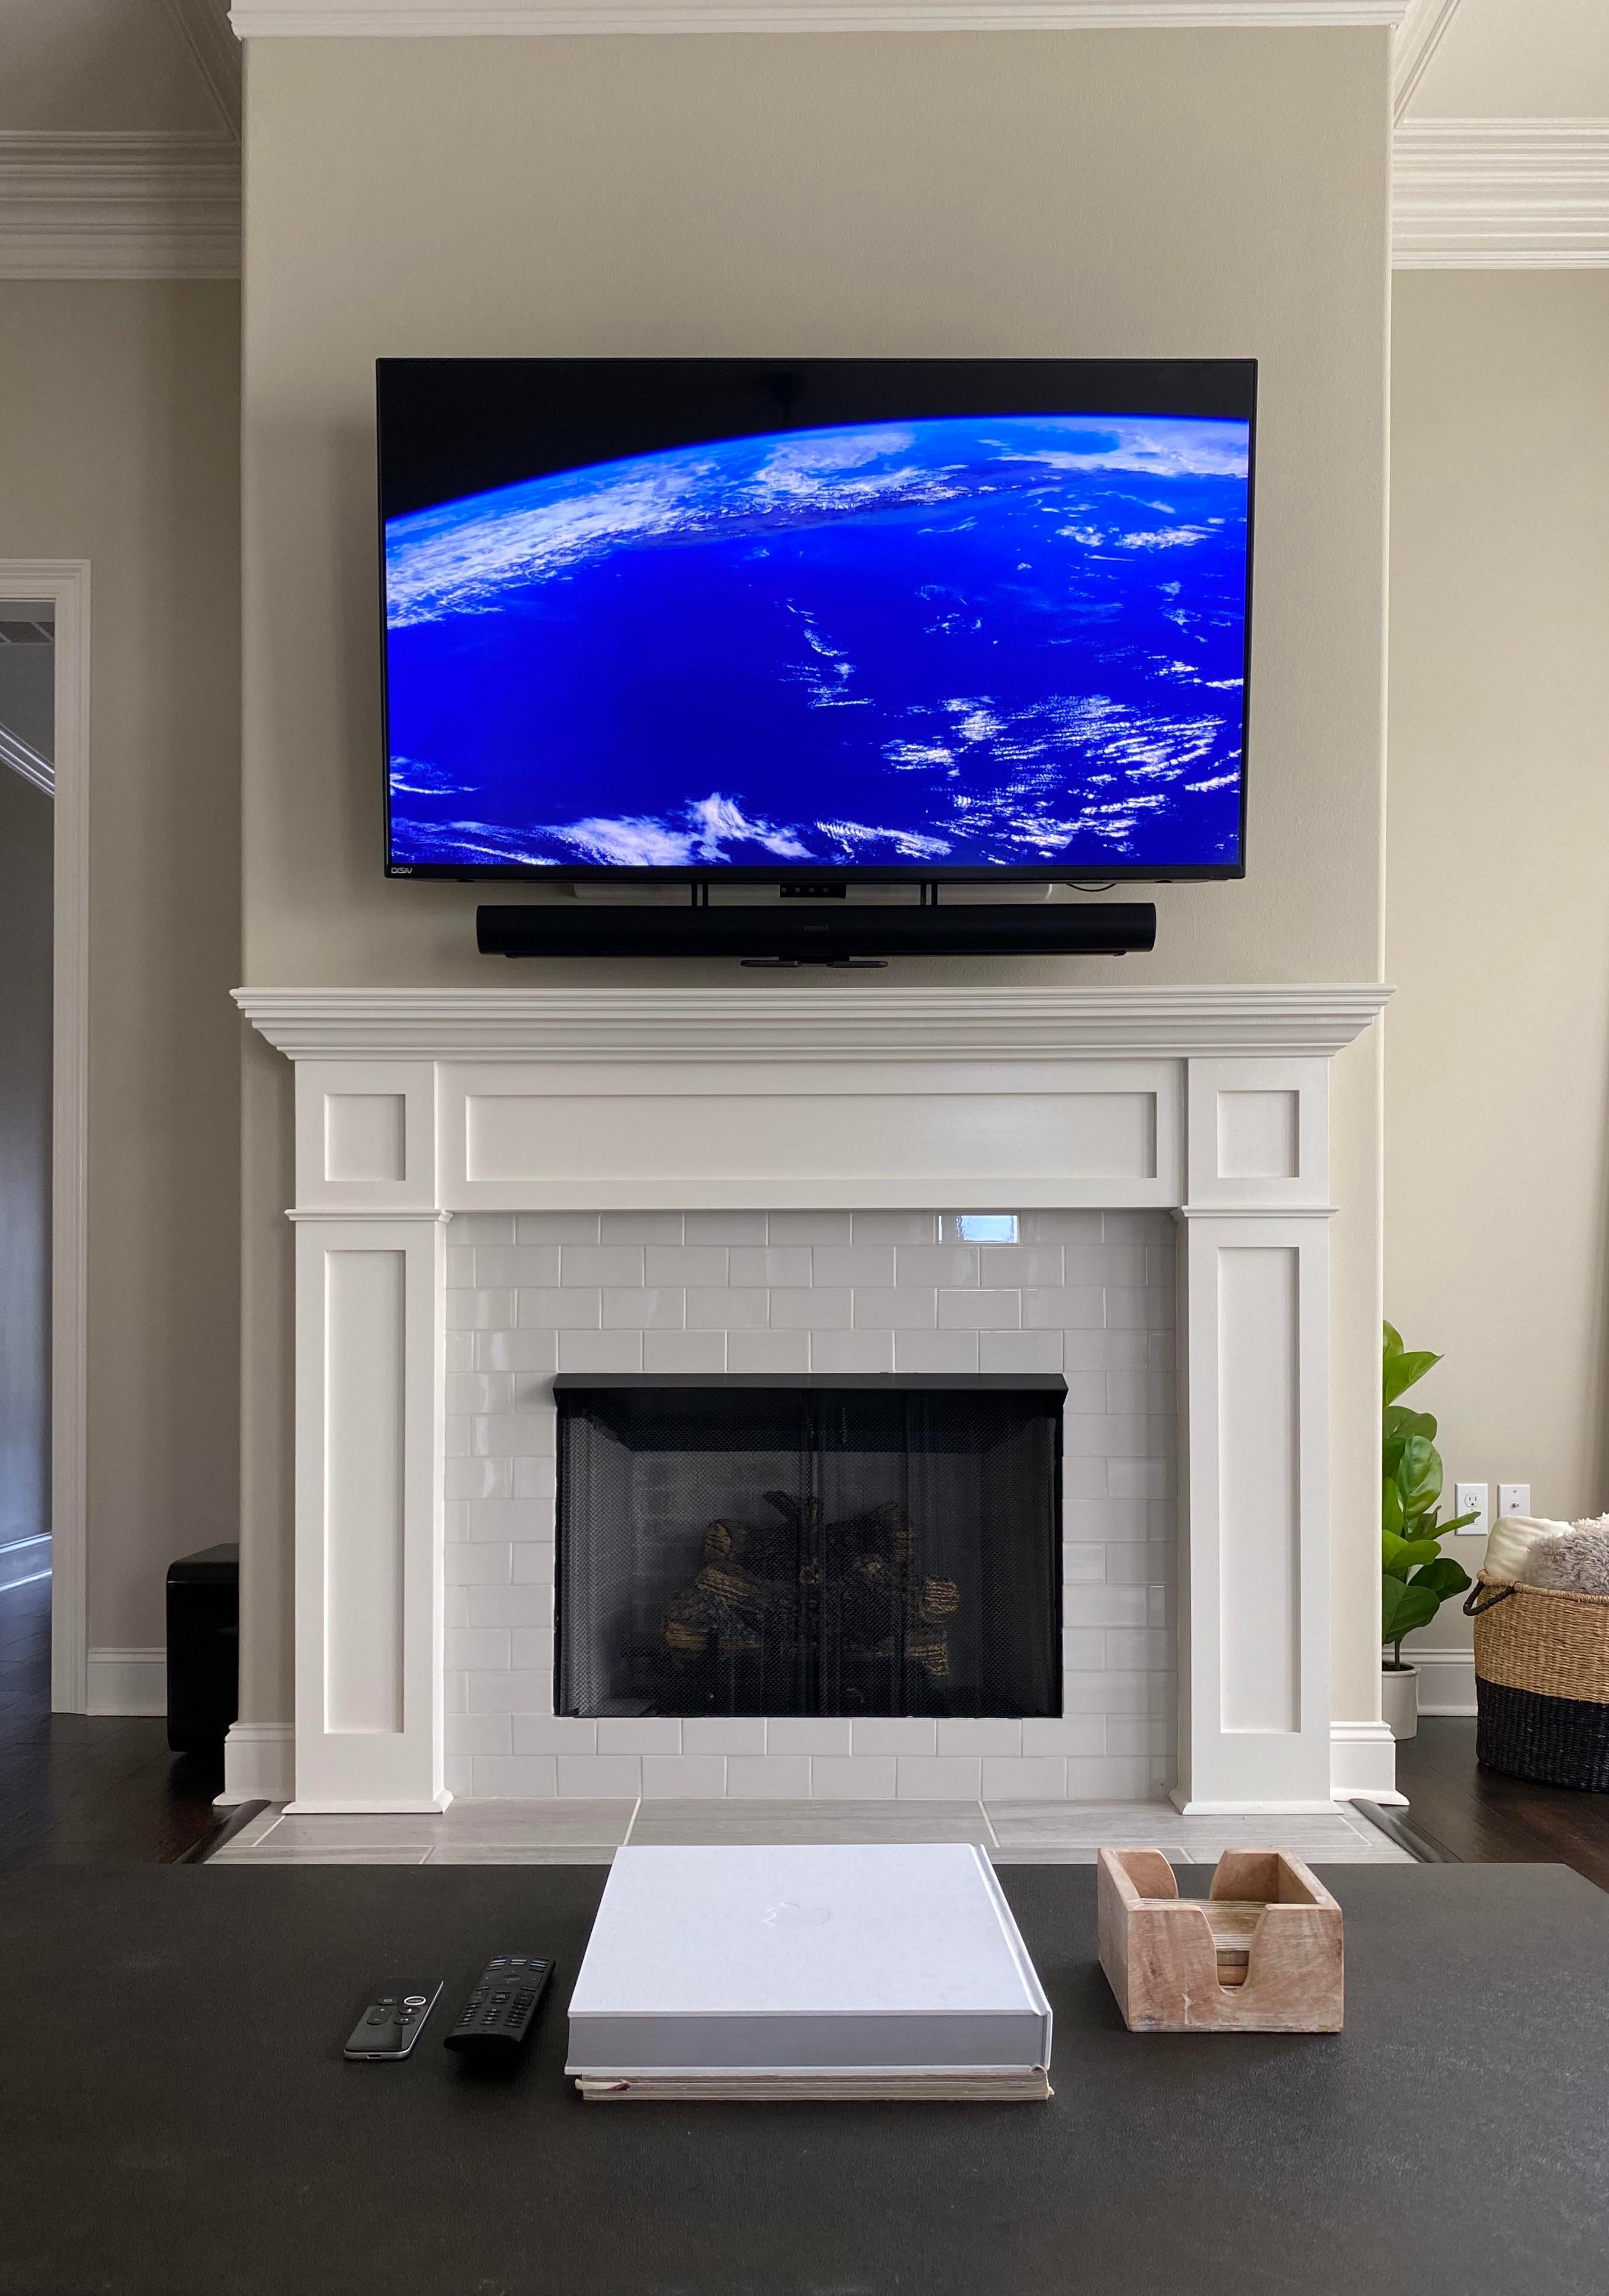 https://www.fireplacedoorsonline.com/images/companies/1/blog/2022%20New%20Content/Mounting%20a%20TV%20Above%20a%20Fireplace/tv-above-fireplace.jpg?1648654085355